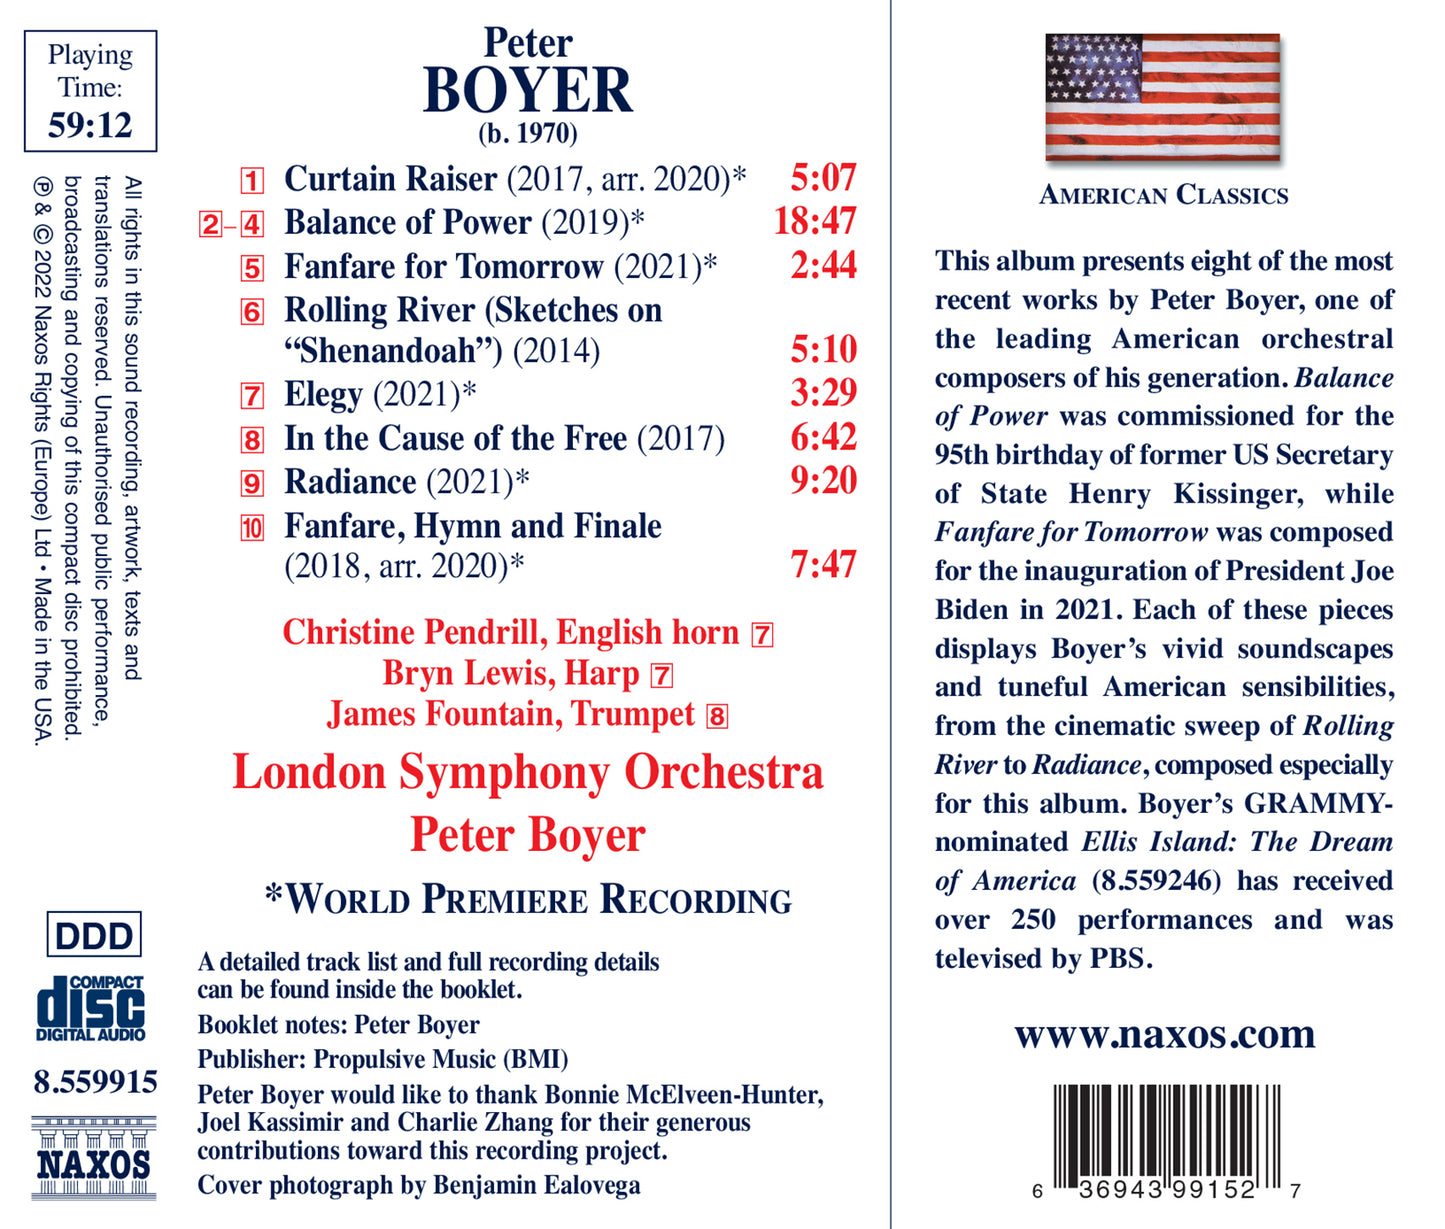 Boyer: Balance Of Power - Orchestral Works  London Symphony Orchestra, Peter Boyer